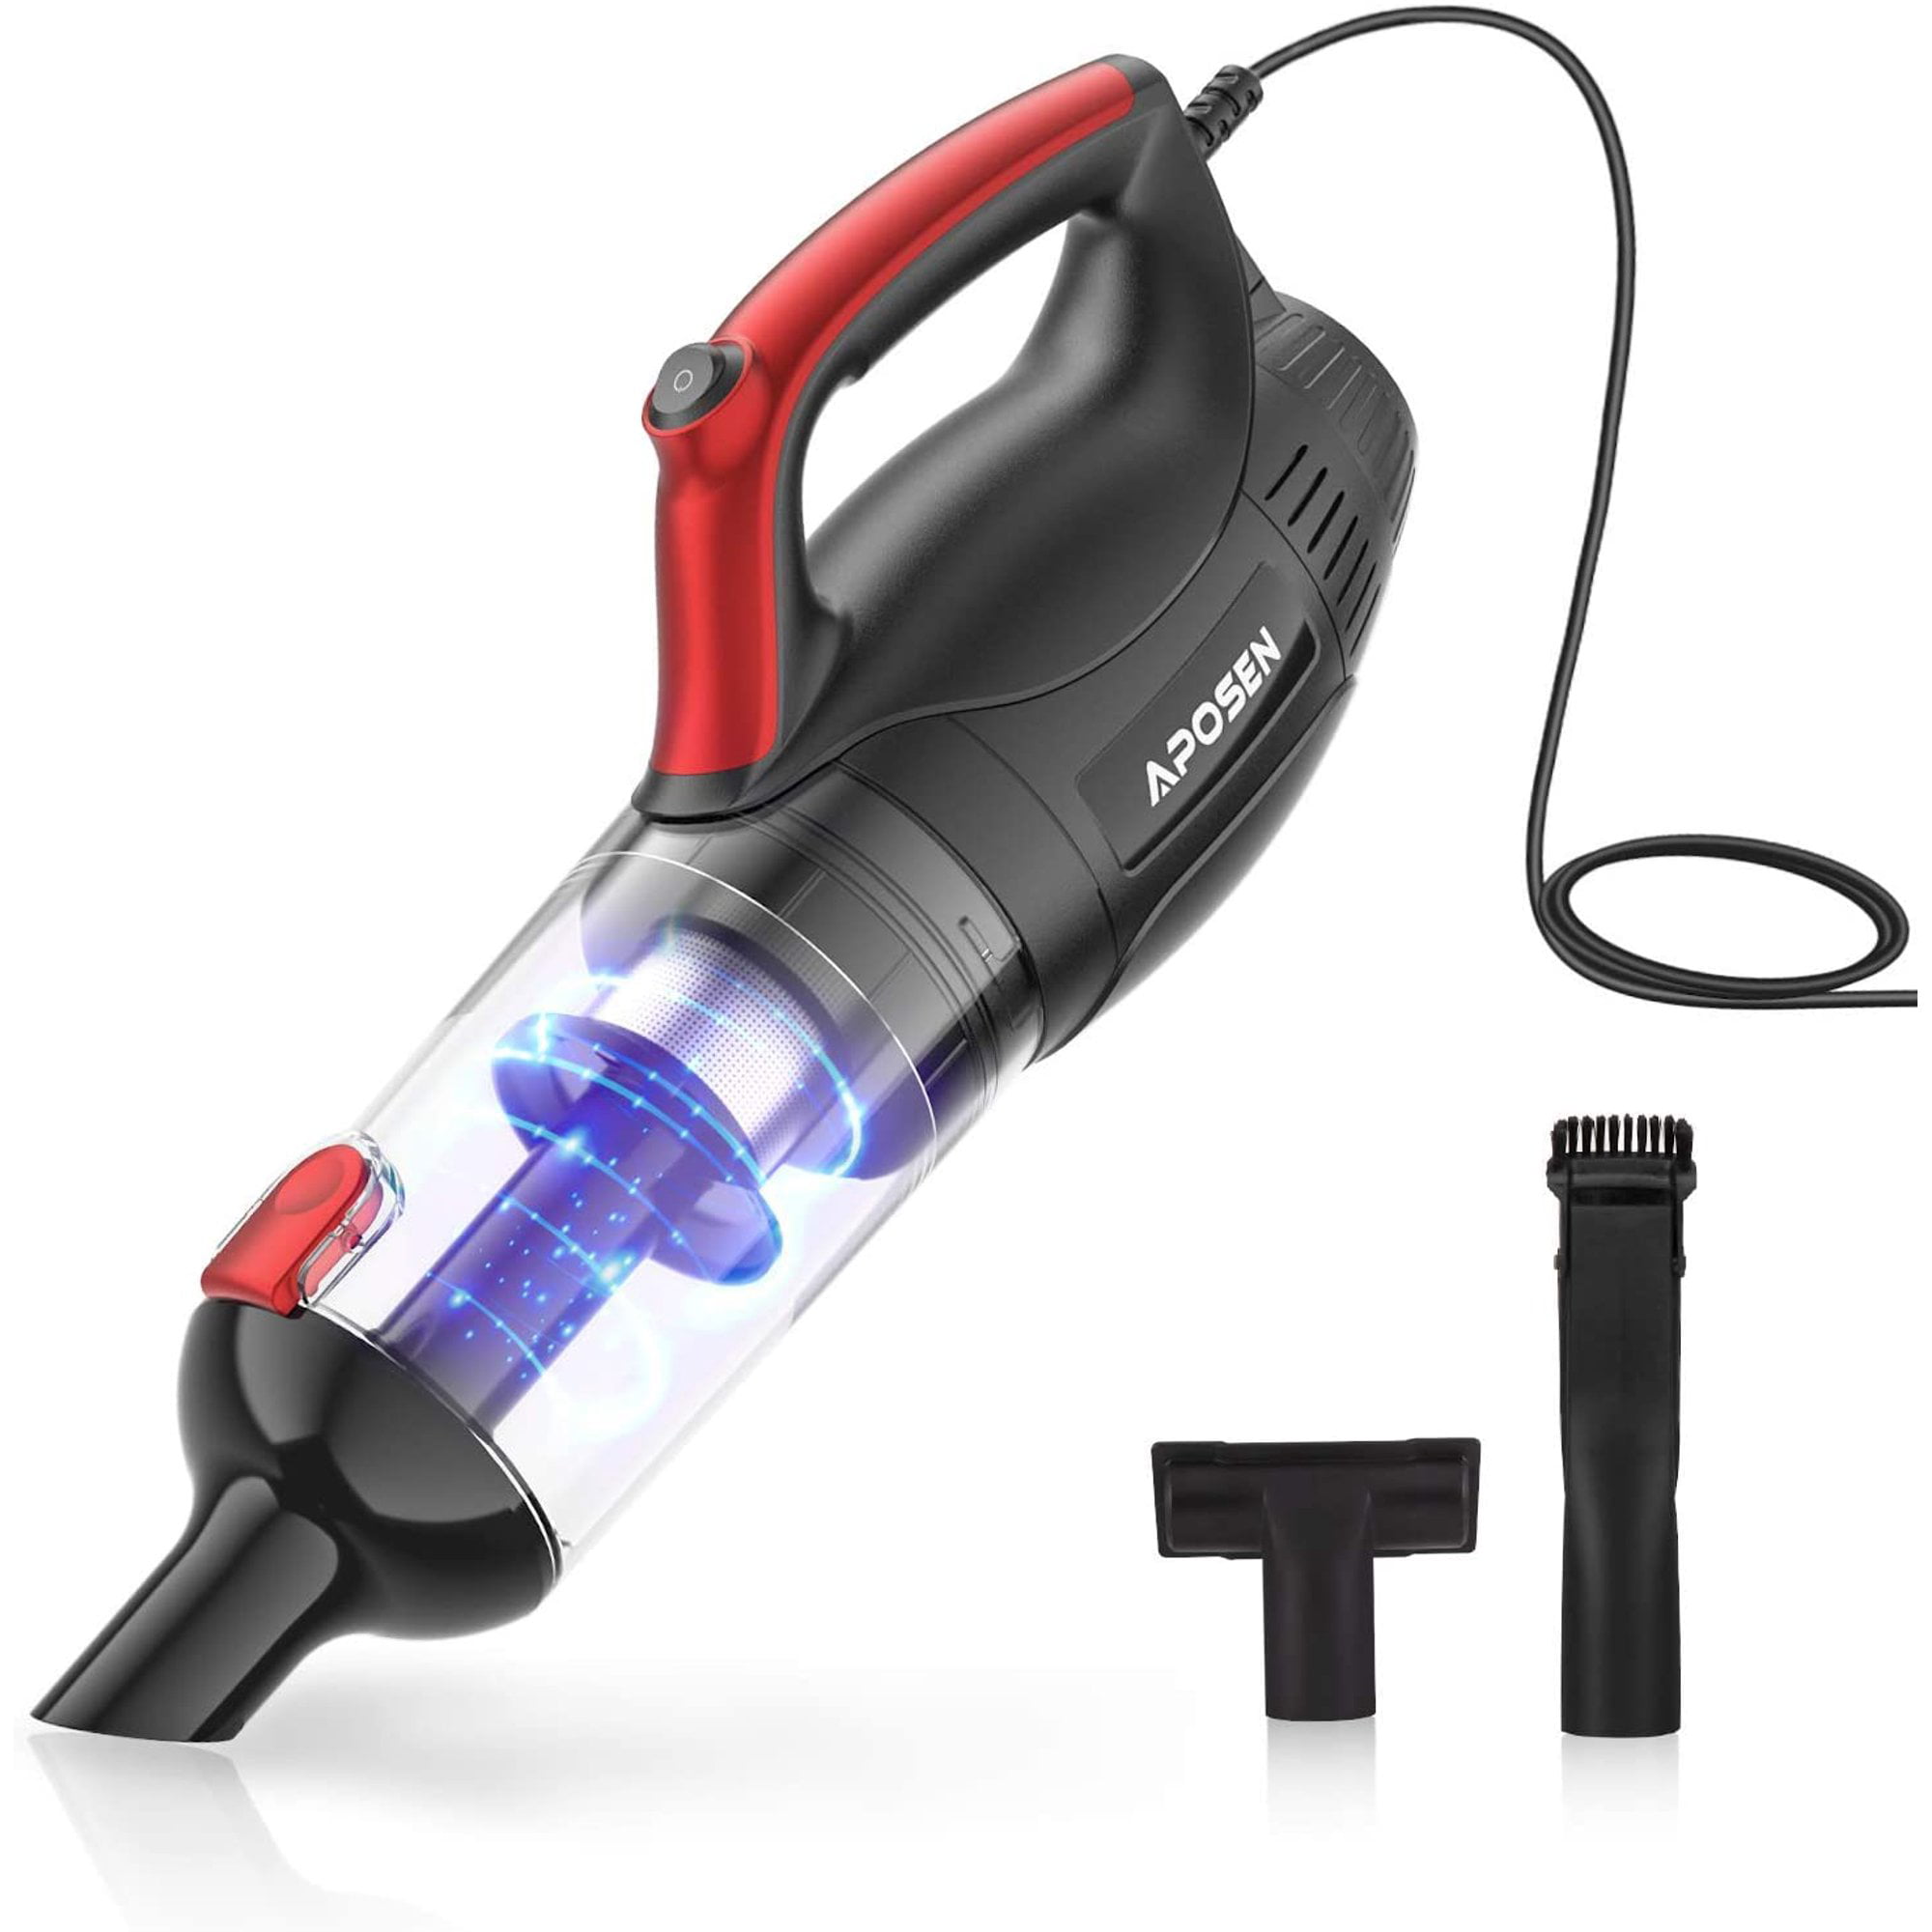 Dušial Handheld Auto Vacuum Cleaner Wet and Dry Dual Use High-Power Powerful Suction Mini Vacuum Cleaners